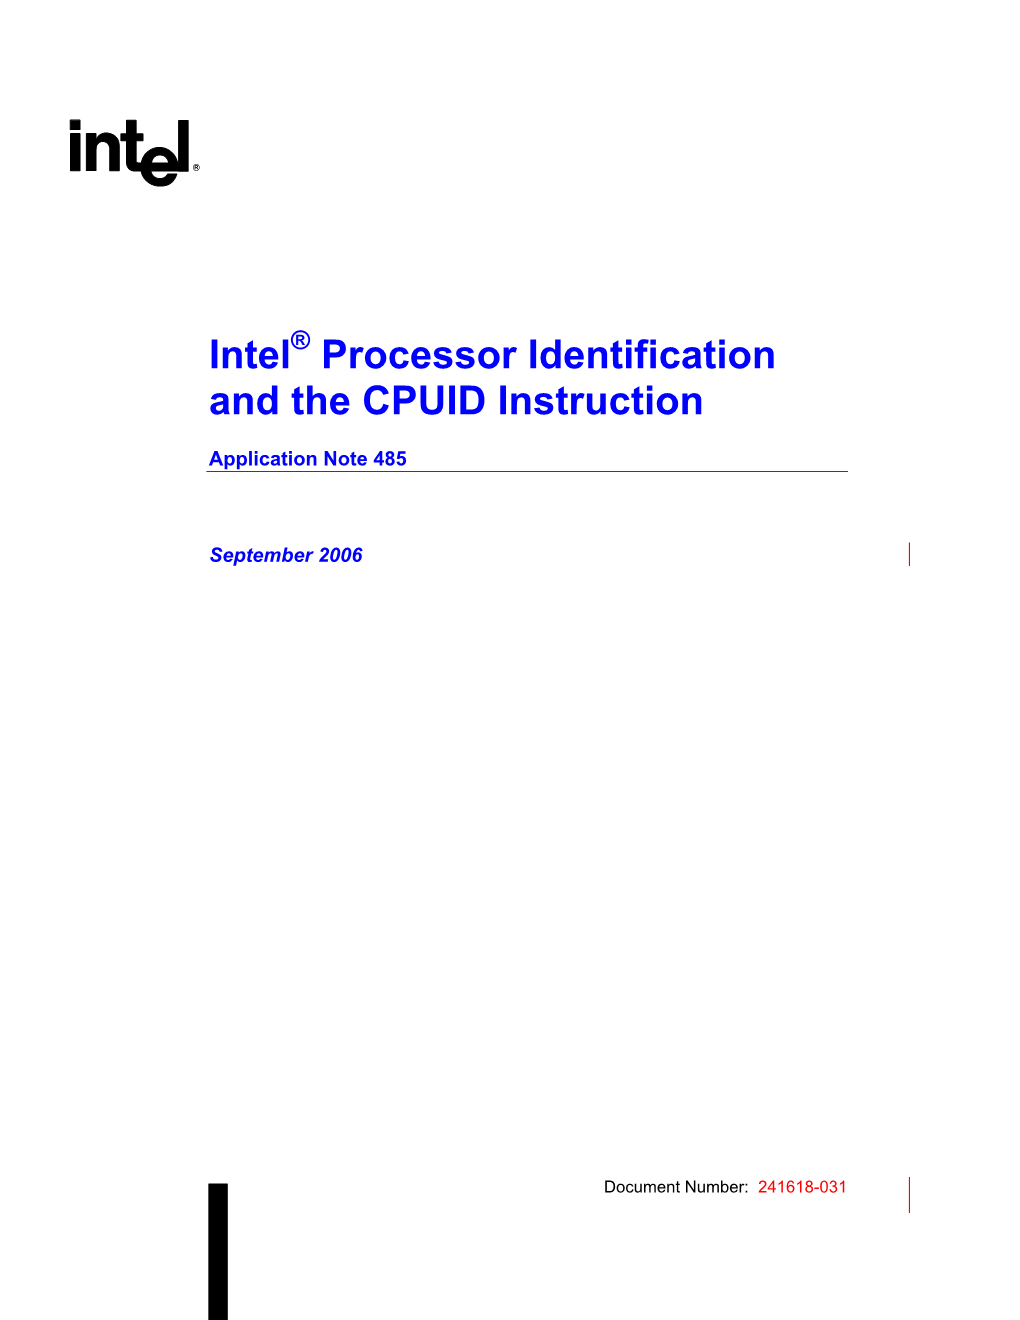 Intel(R) Processor Idientification and the CPUID Instruction